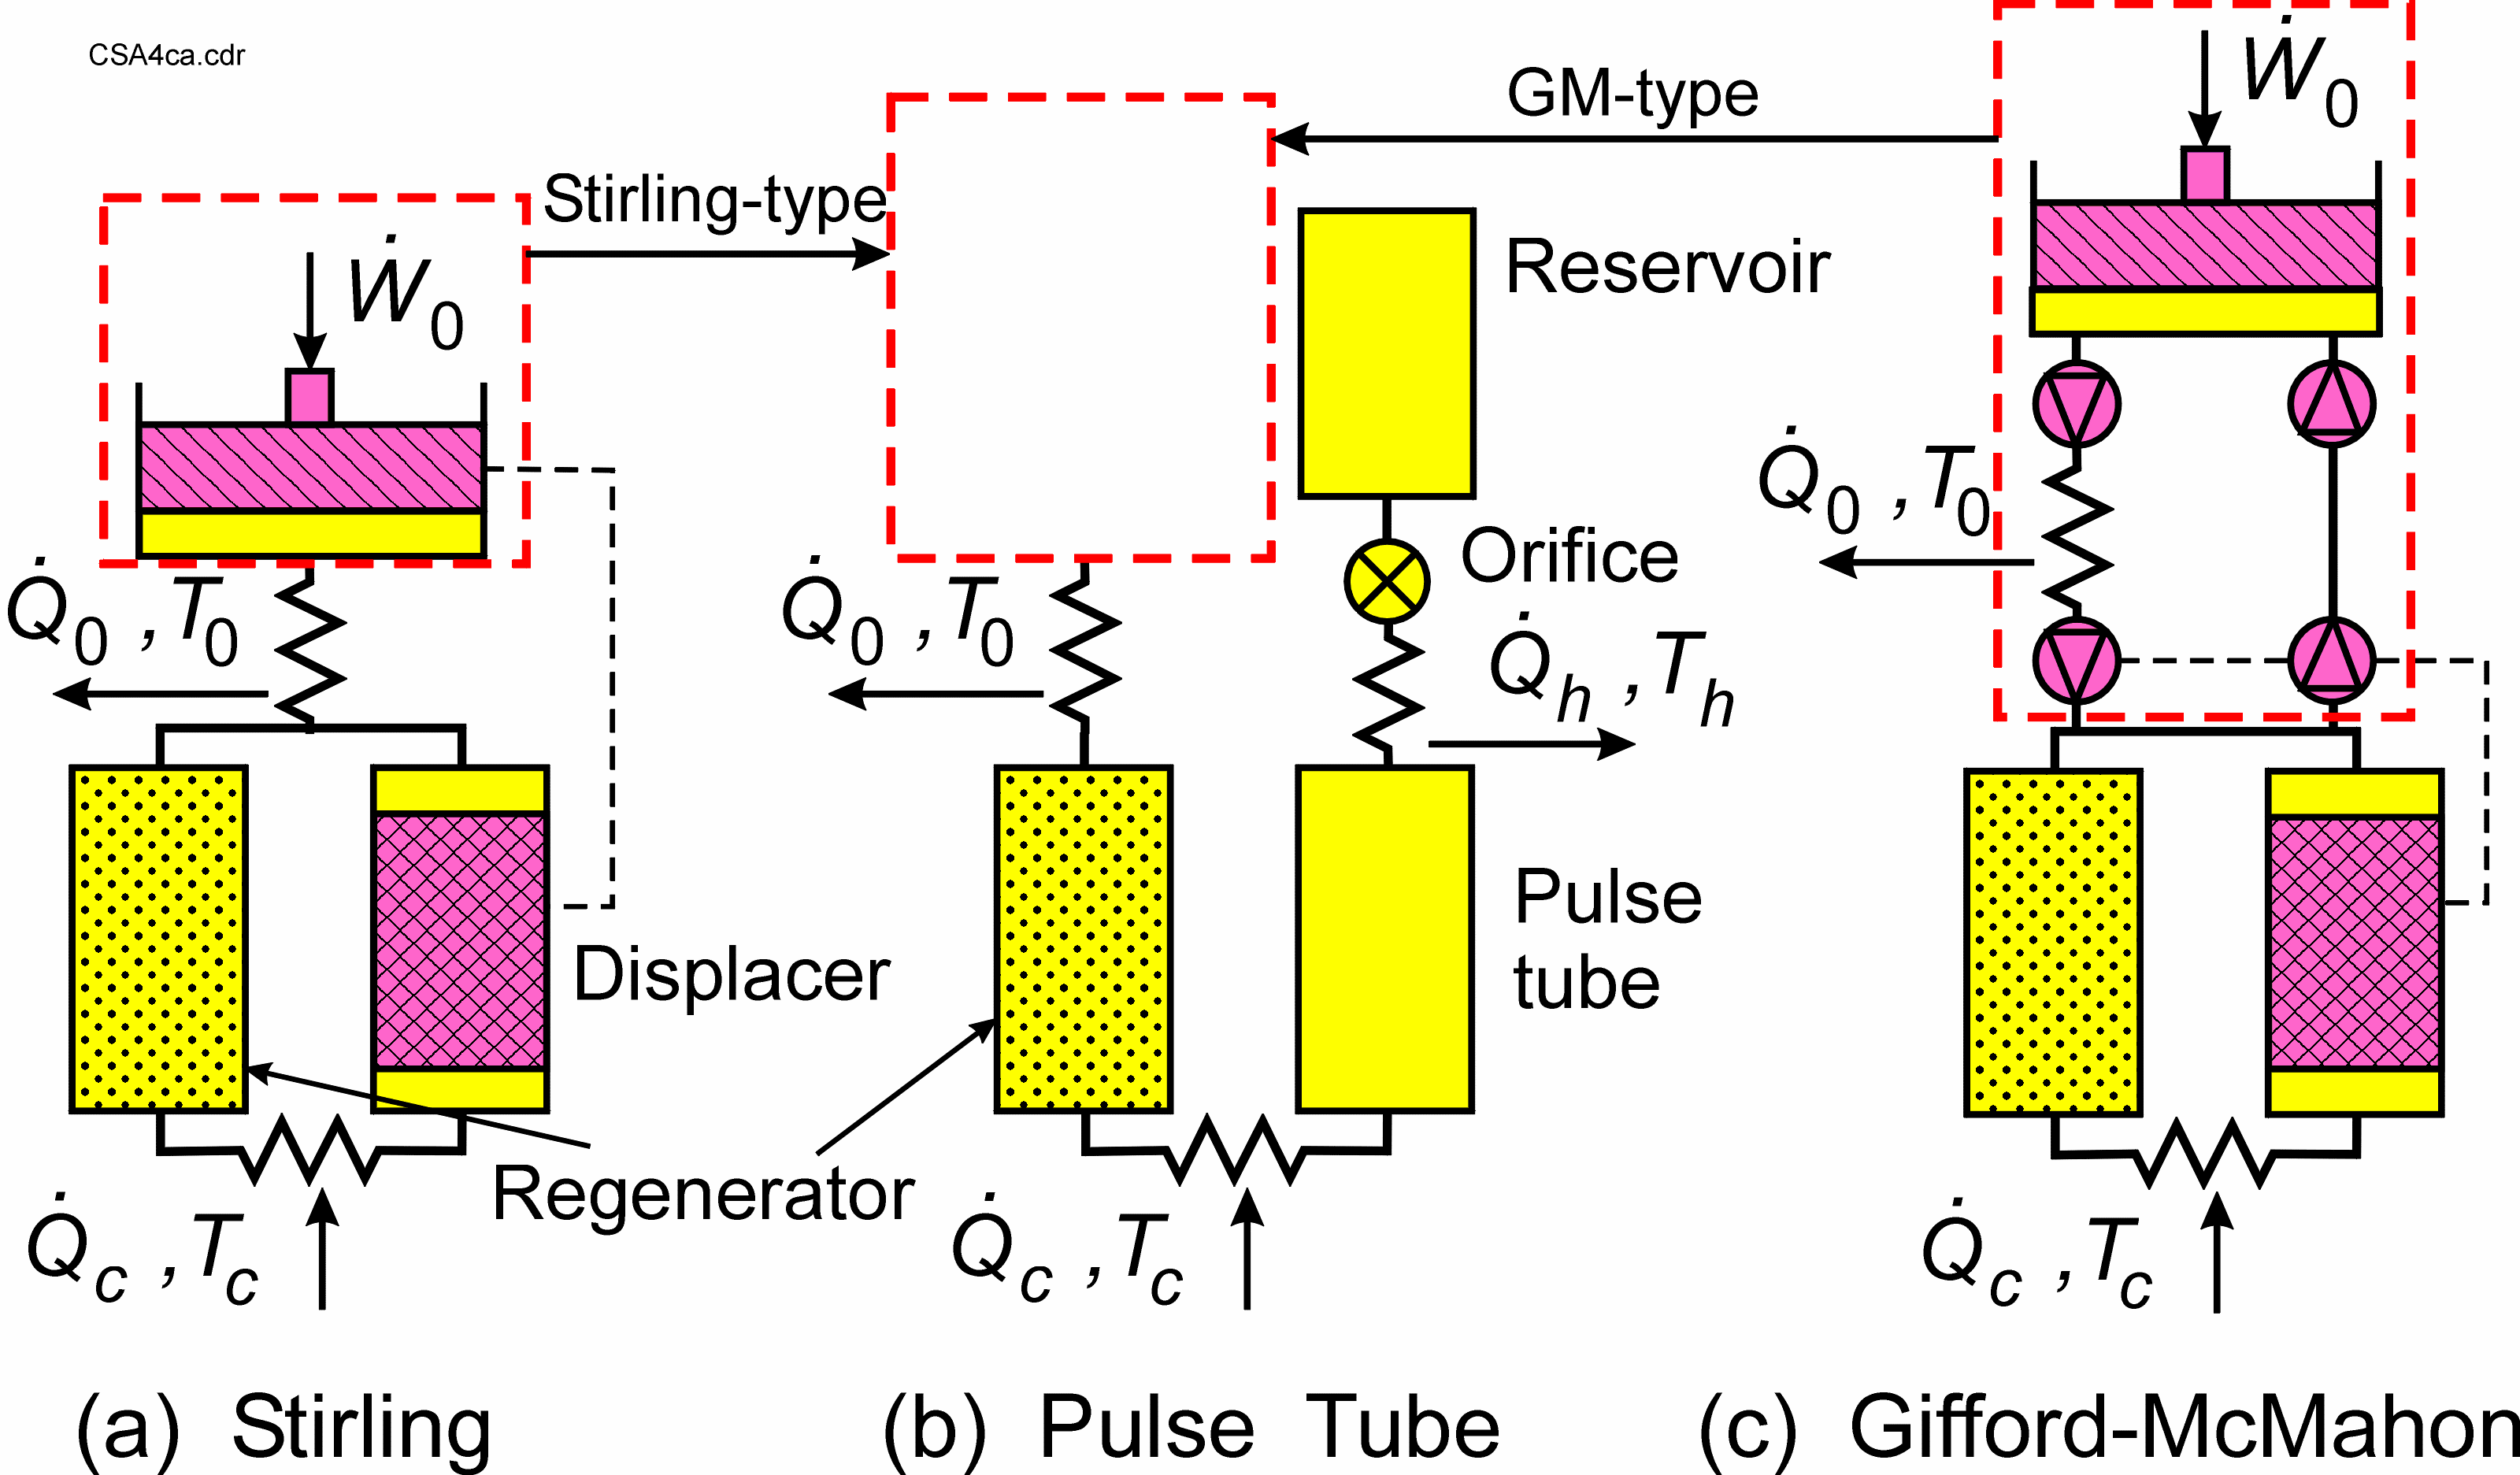 Schematics of the most common regenerative cycles